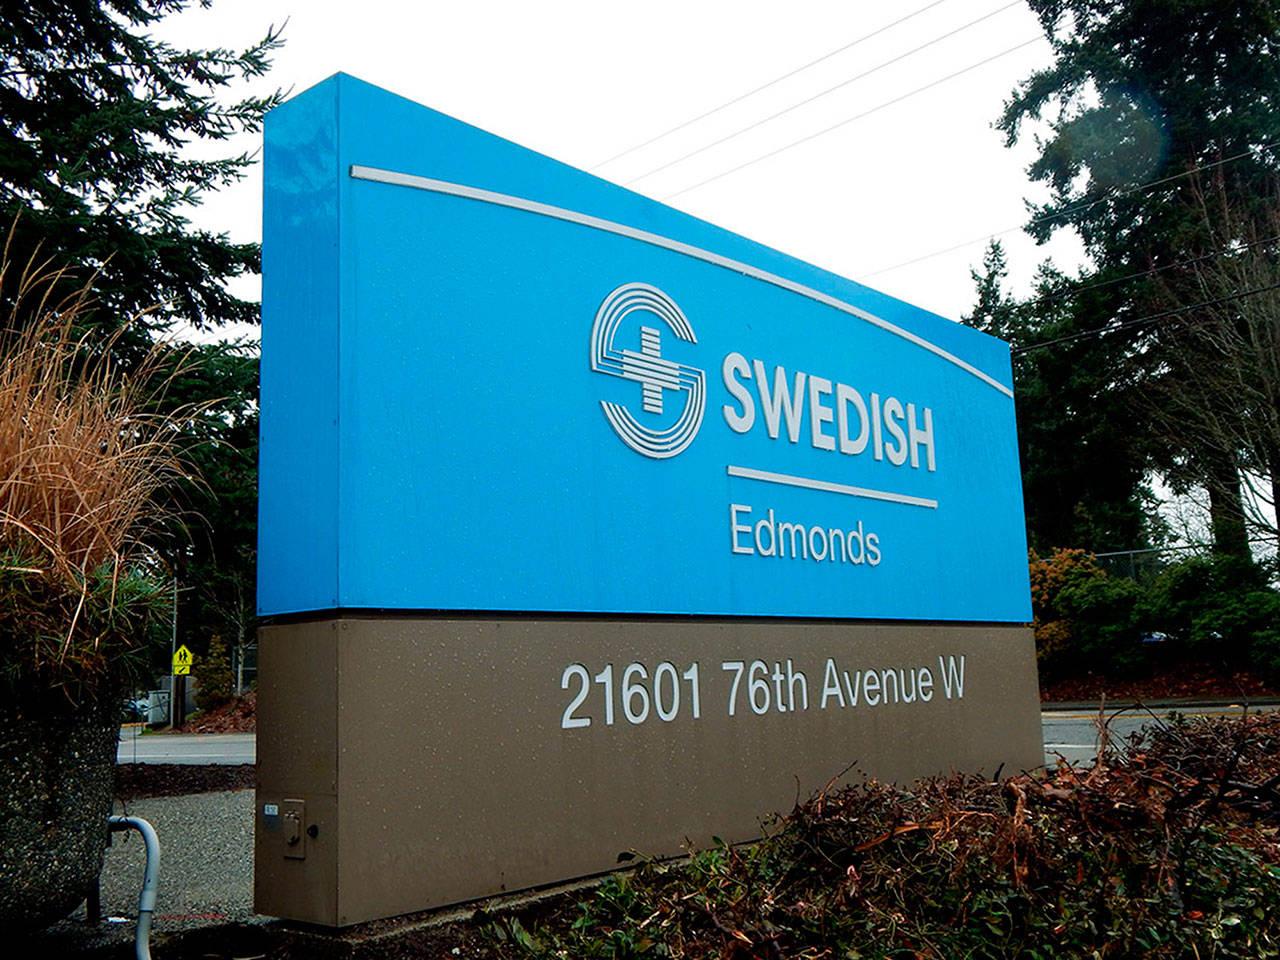 Swedish Edmonds is one of the locations that will be hit by a health care workers strike that begins Tuesday.